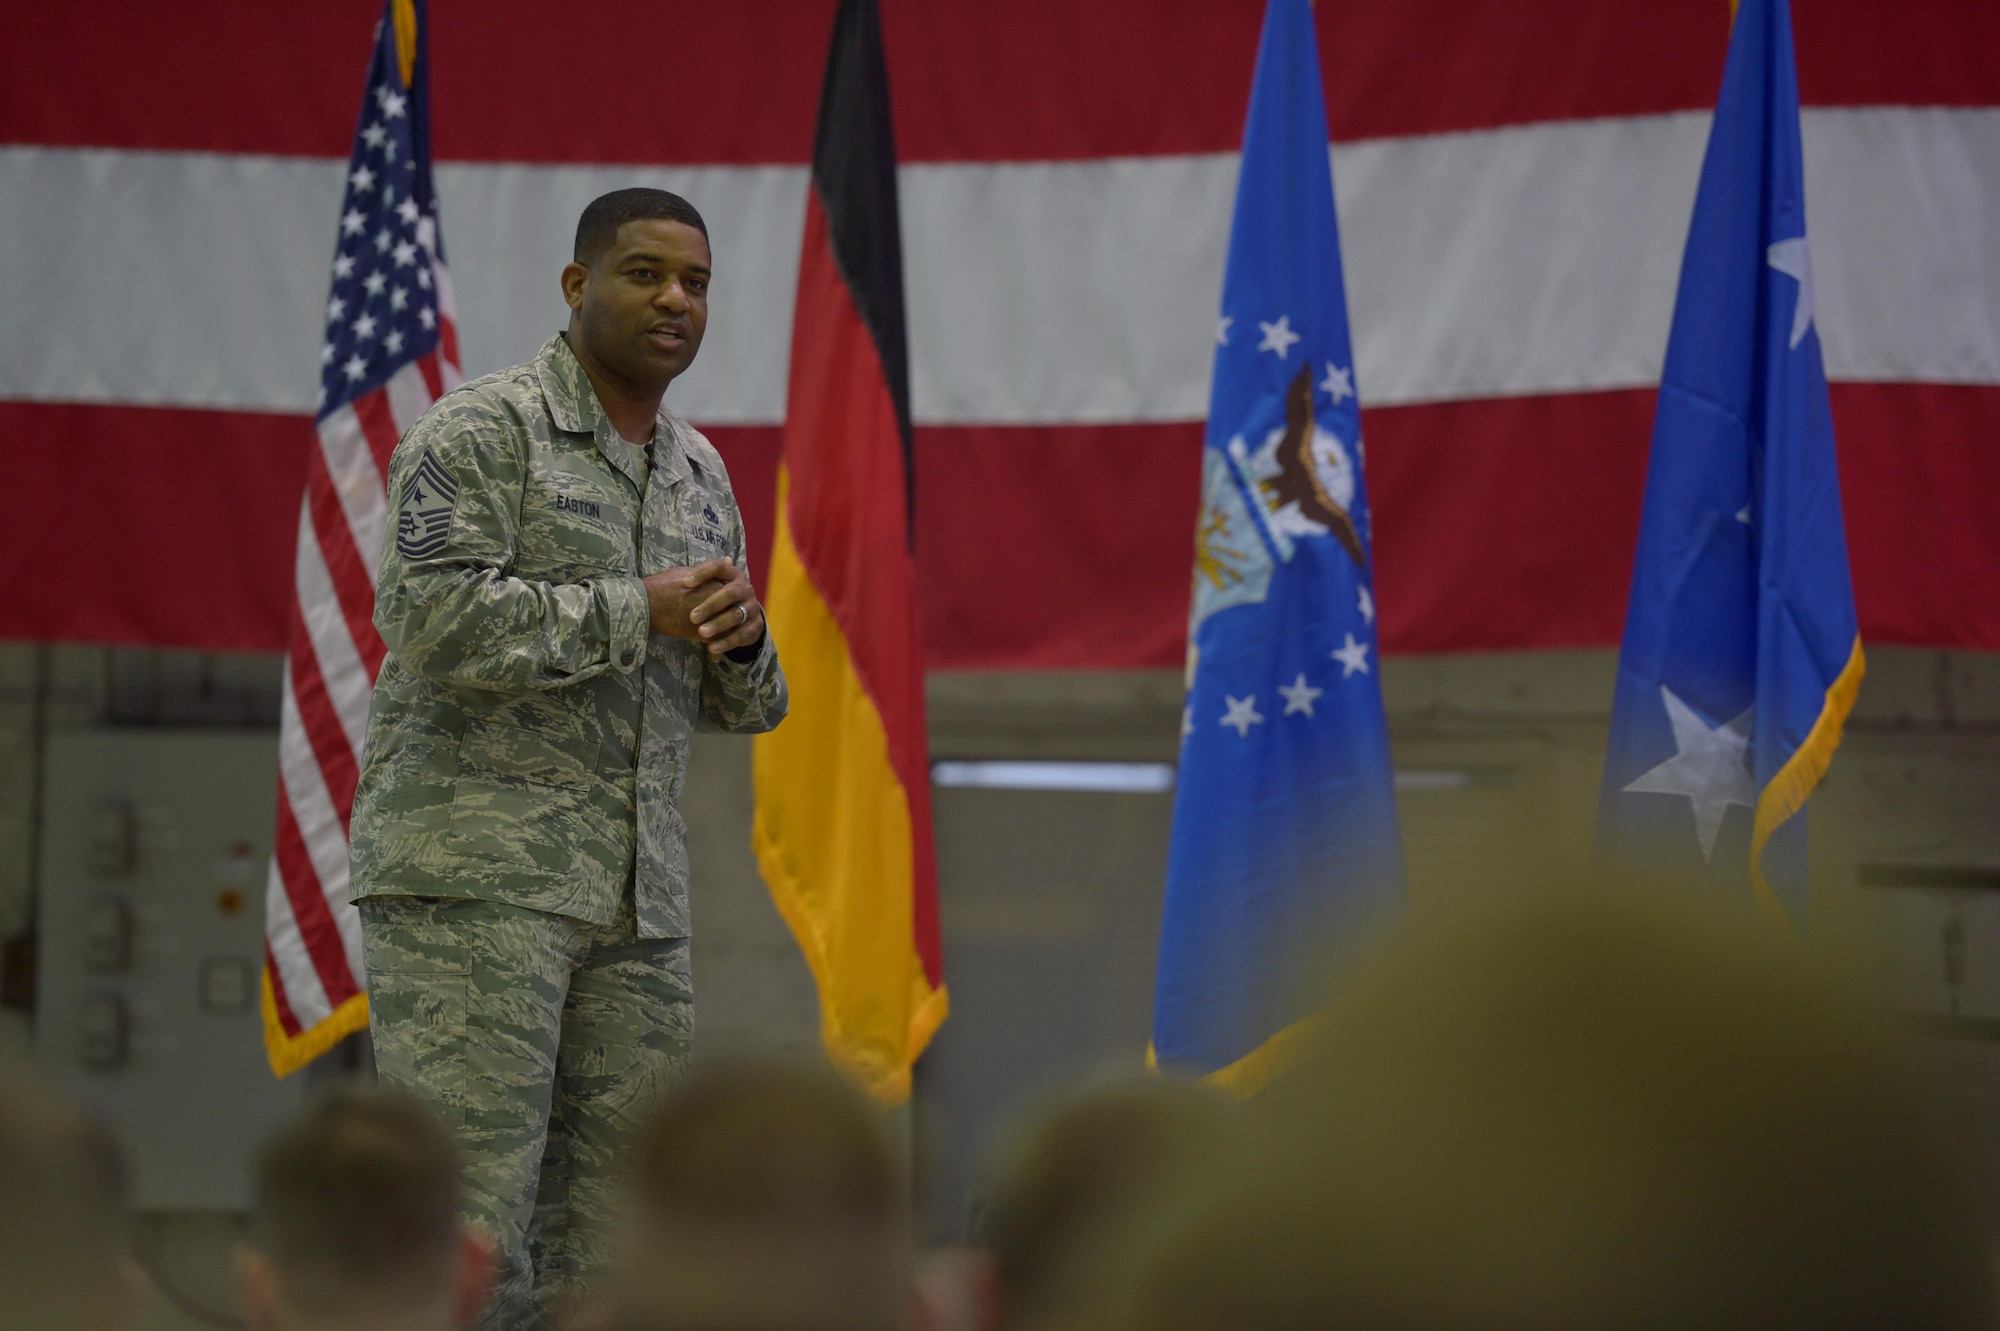 Chief Master Sgt. Phillip Easton, 3rd Air Force and 17th Expeditionary Air Force command chief, talks about the importance of family during an all call at Hangar One on Spangdahlem Air Base, Germany, Dec. 14, 2016. During the 3rd AF leadership visit they were given a tour around base and met with Airmen. (U.S. Air Force photo by Staff Sgt. Jonathan Snyder)